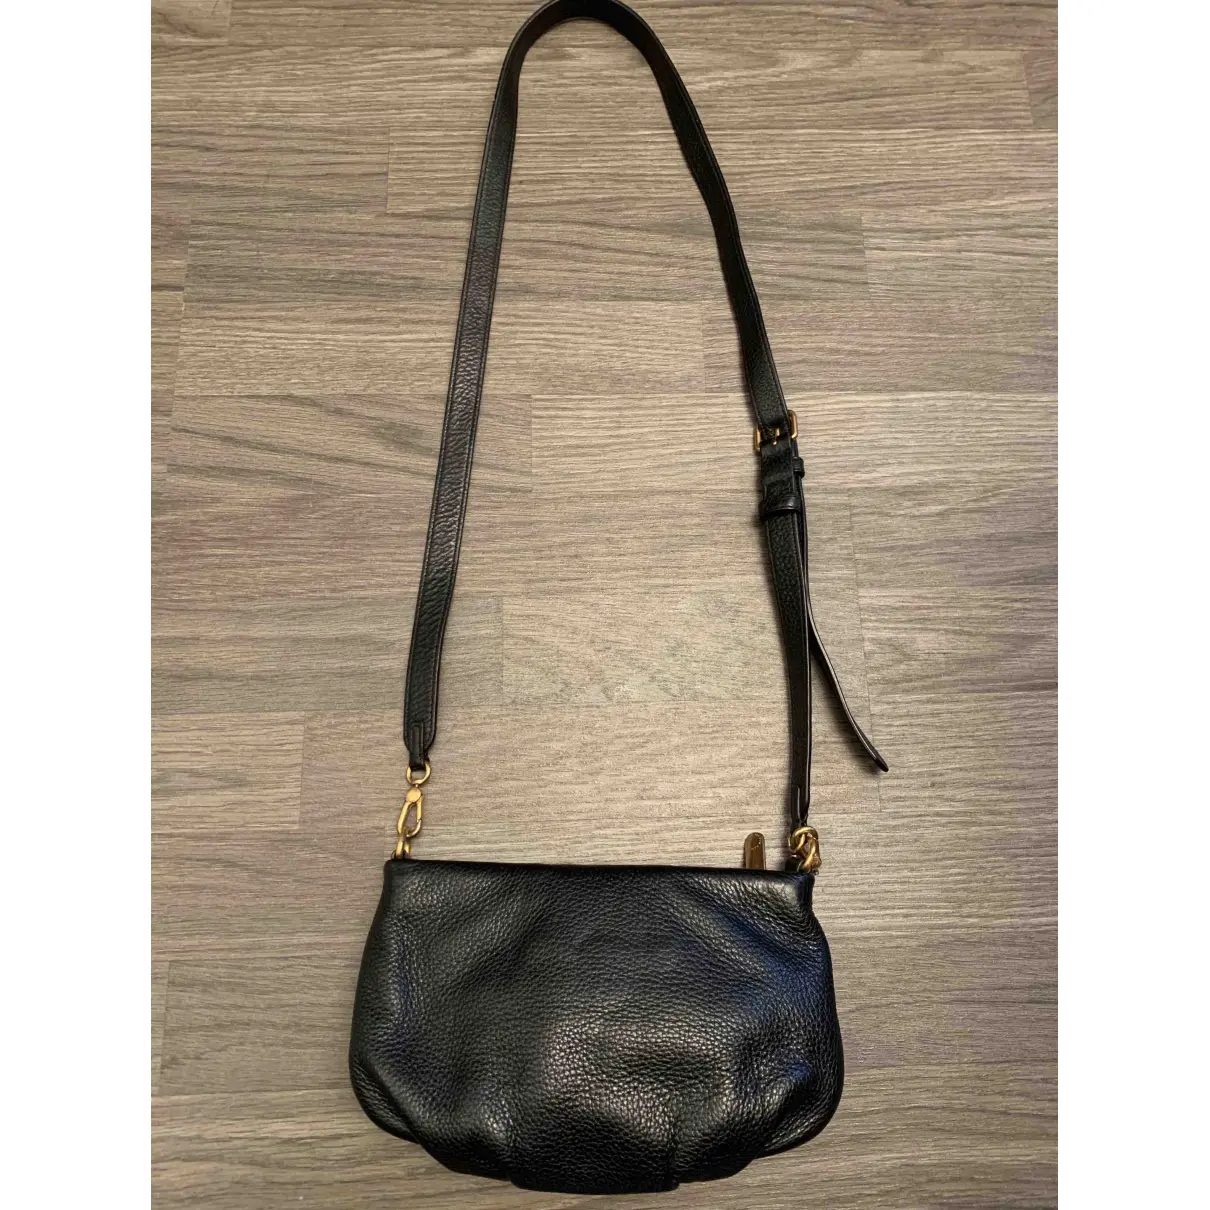 Buy Marc by Marc Jacobs Leather crossbody bag online